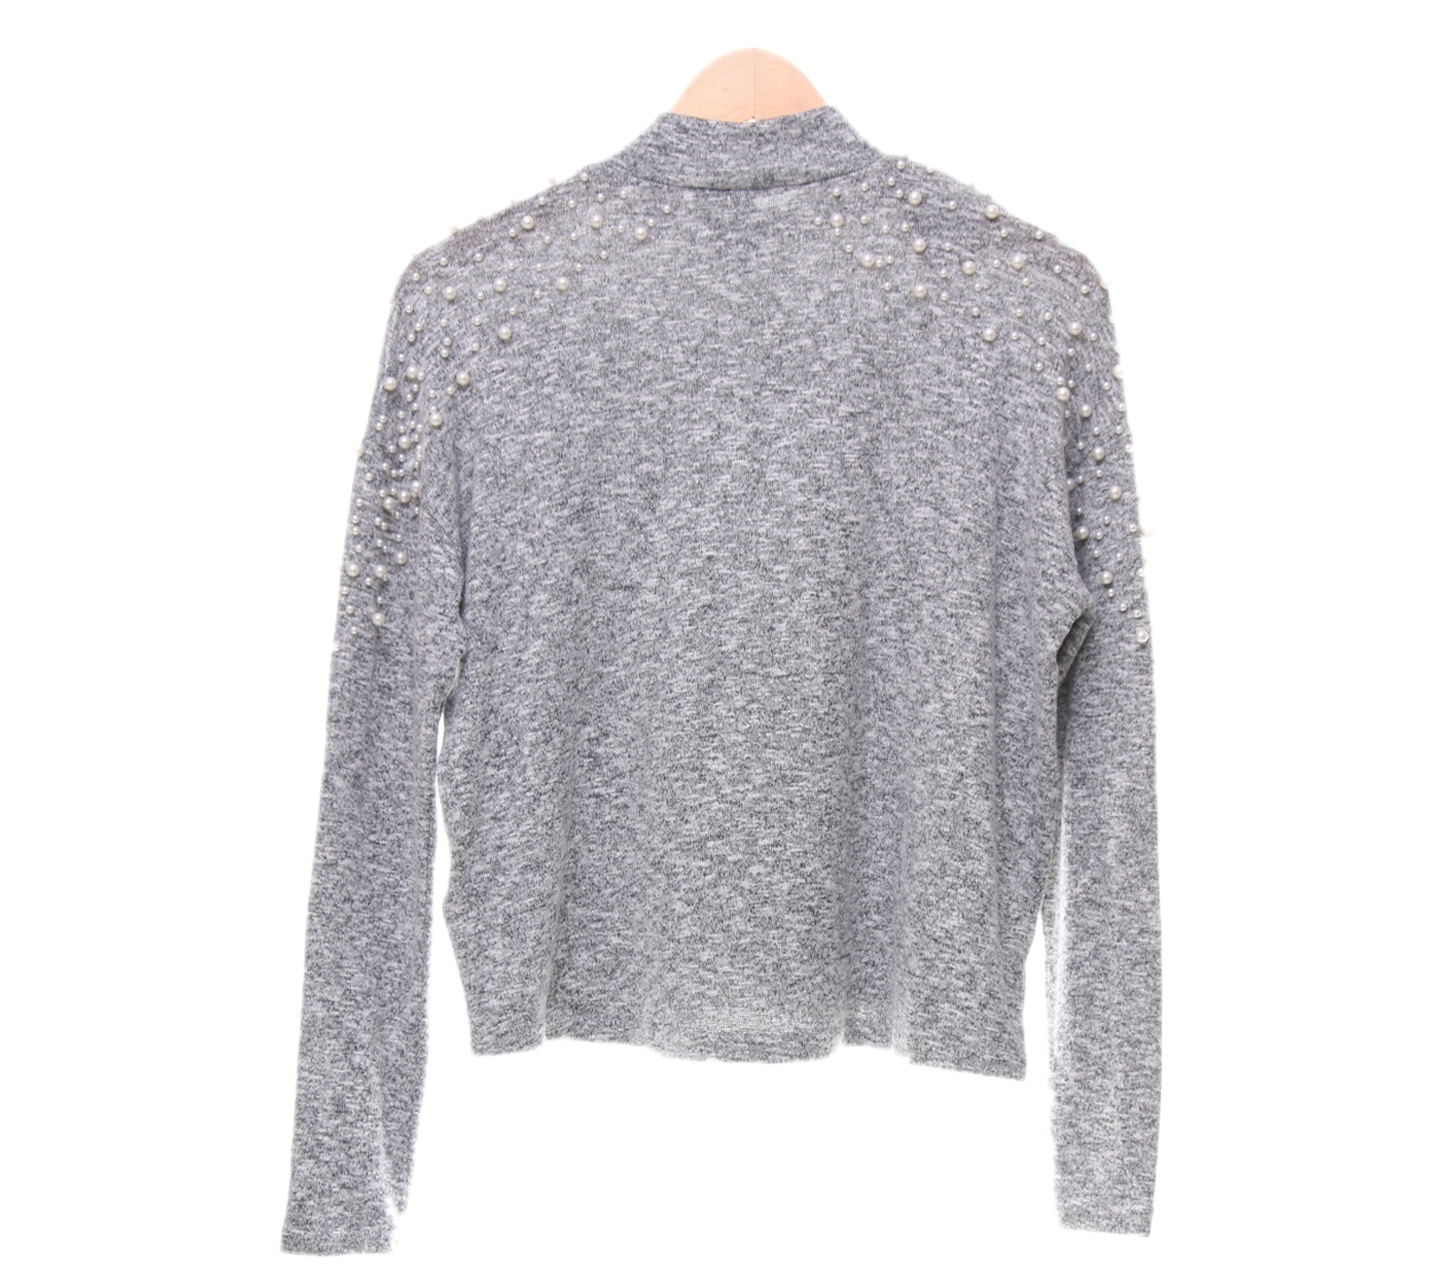 H&M Grey Pearls Blouse